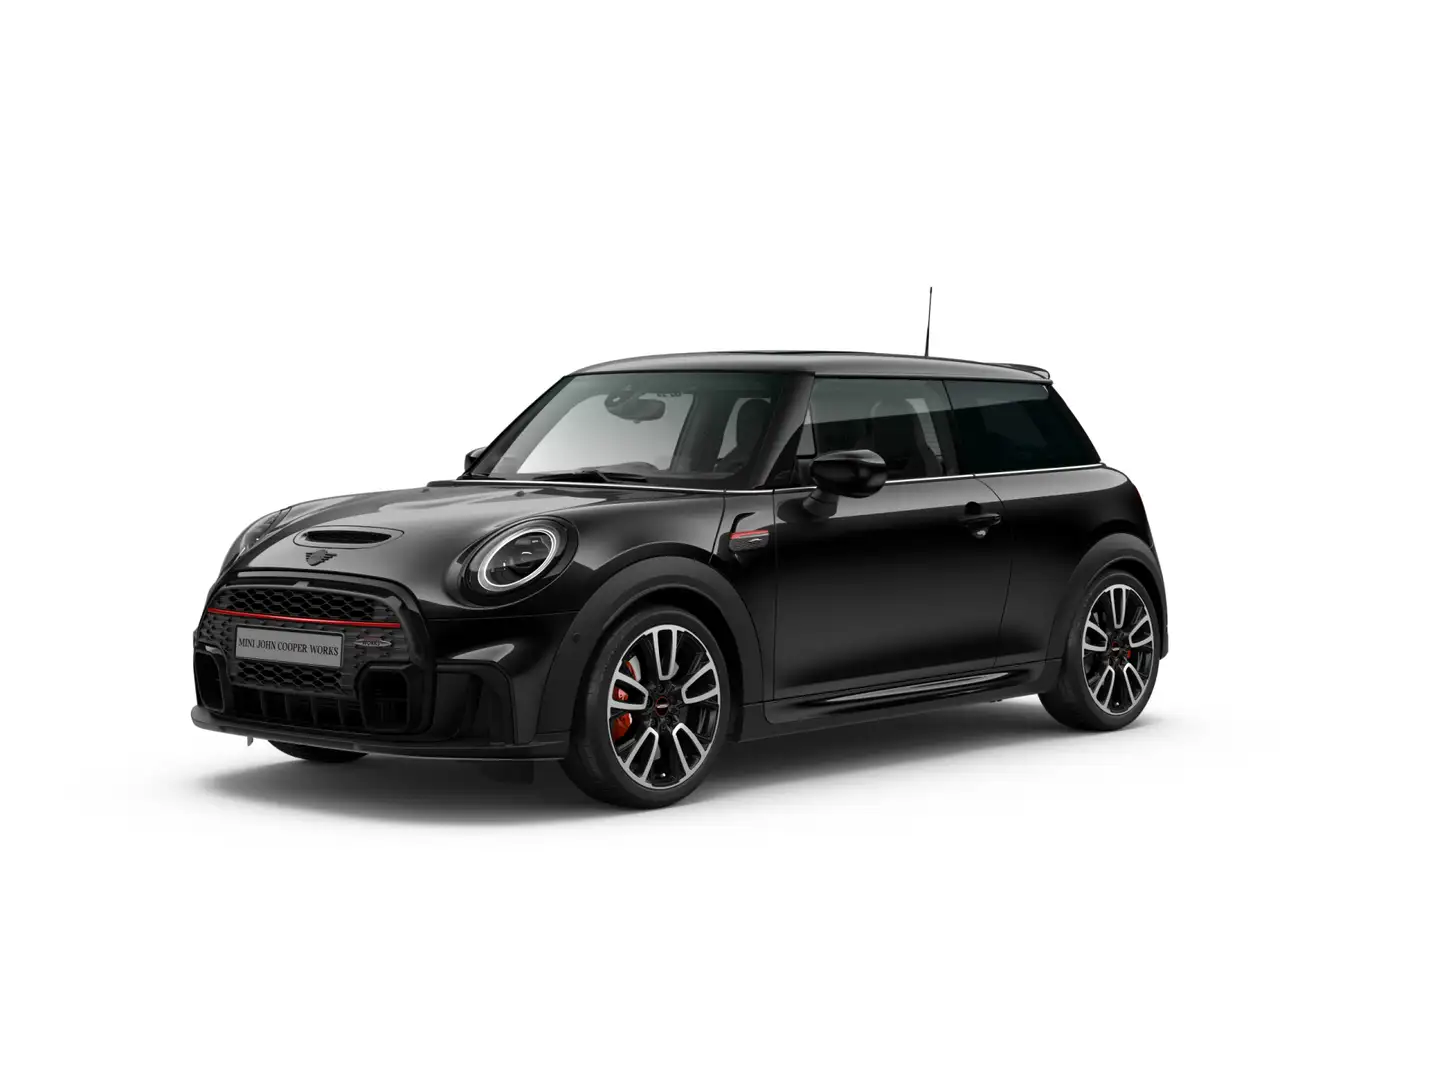 MINI John Cooper Works 1 TO 6 LIMITED EDITION 1 OF 999 Nero - 1